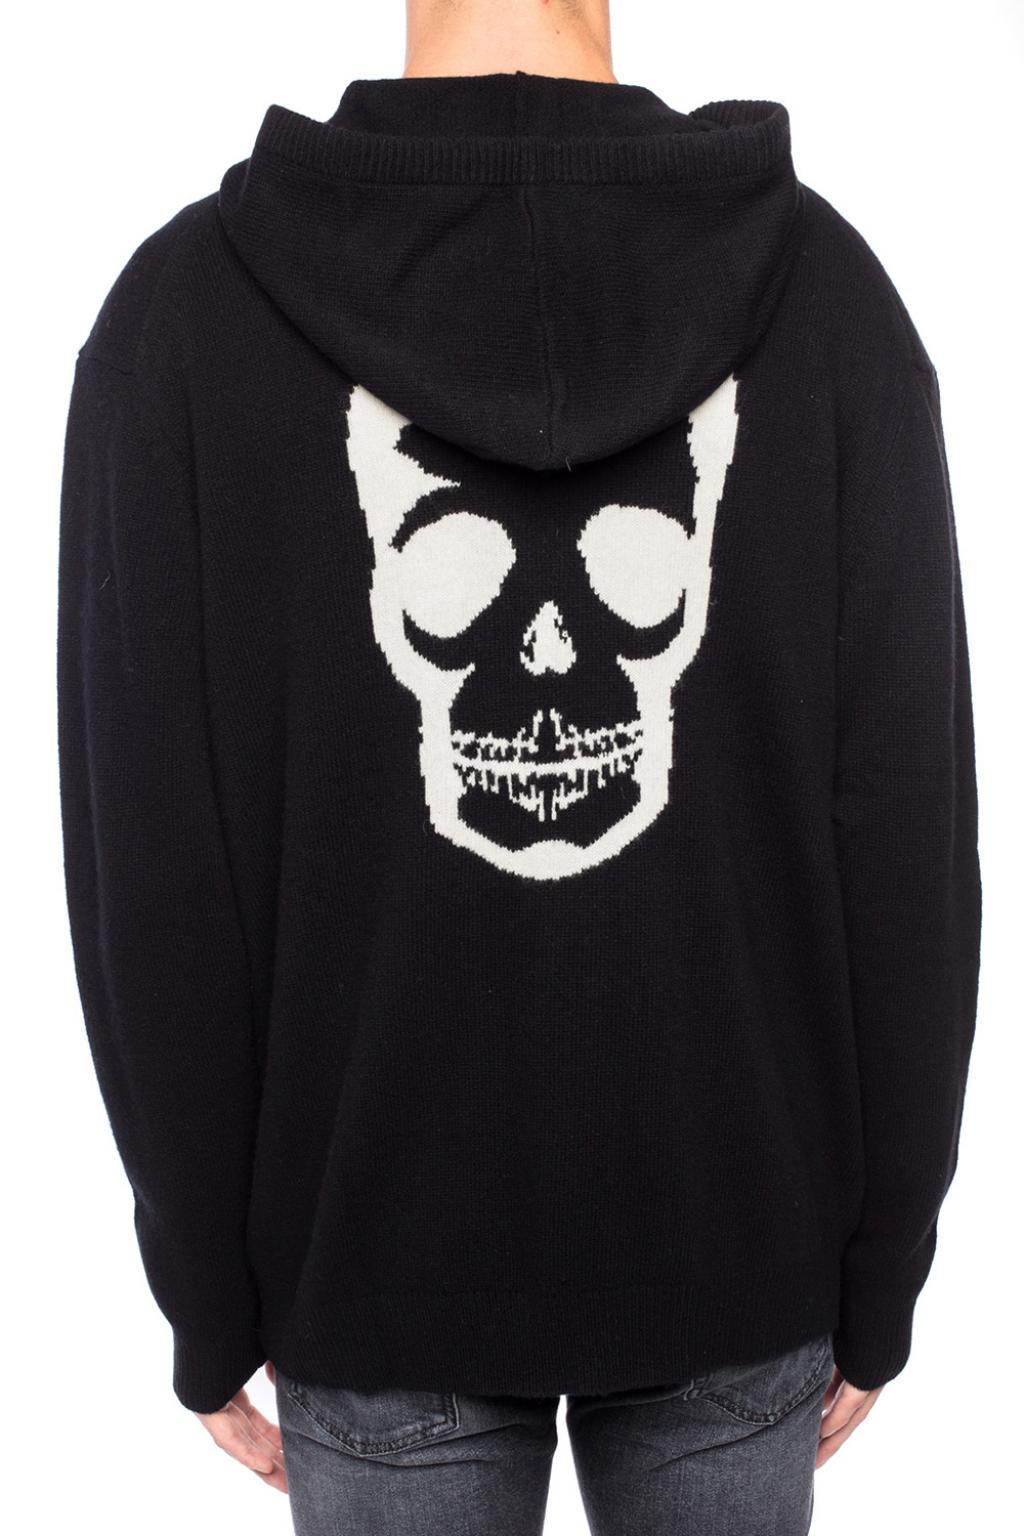 Lyst - Zadig & Voltaire Embroidered Skull Sweater in Black for Men